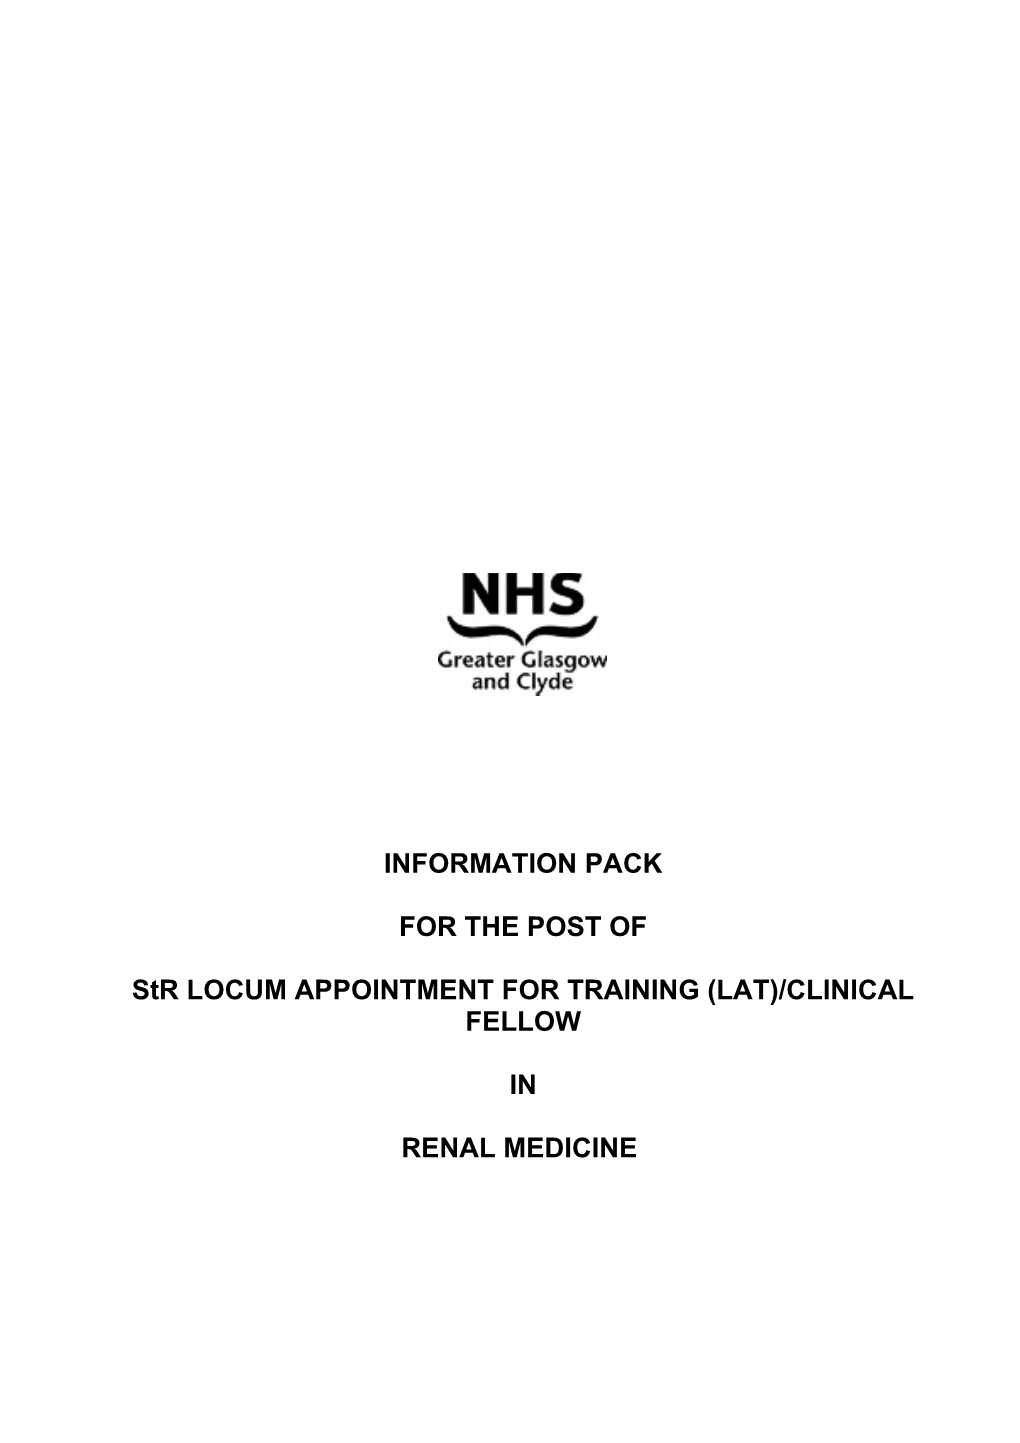 Str LOCUM APPOINTMENT for TRAINING(Lat)/ CLINICAL FELLOW in RENAL MEDICINE